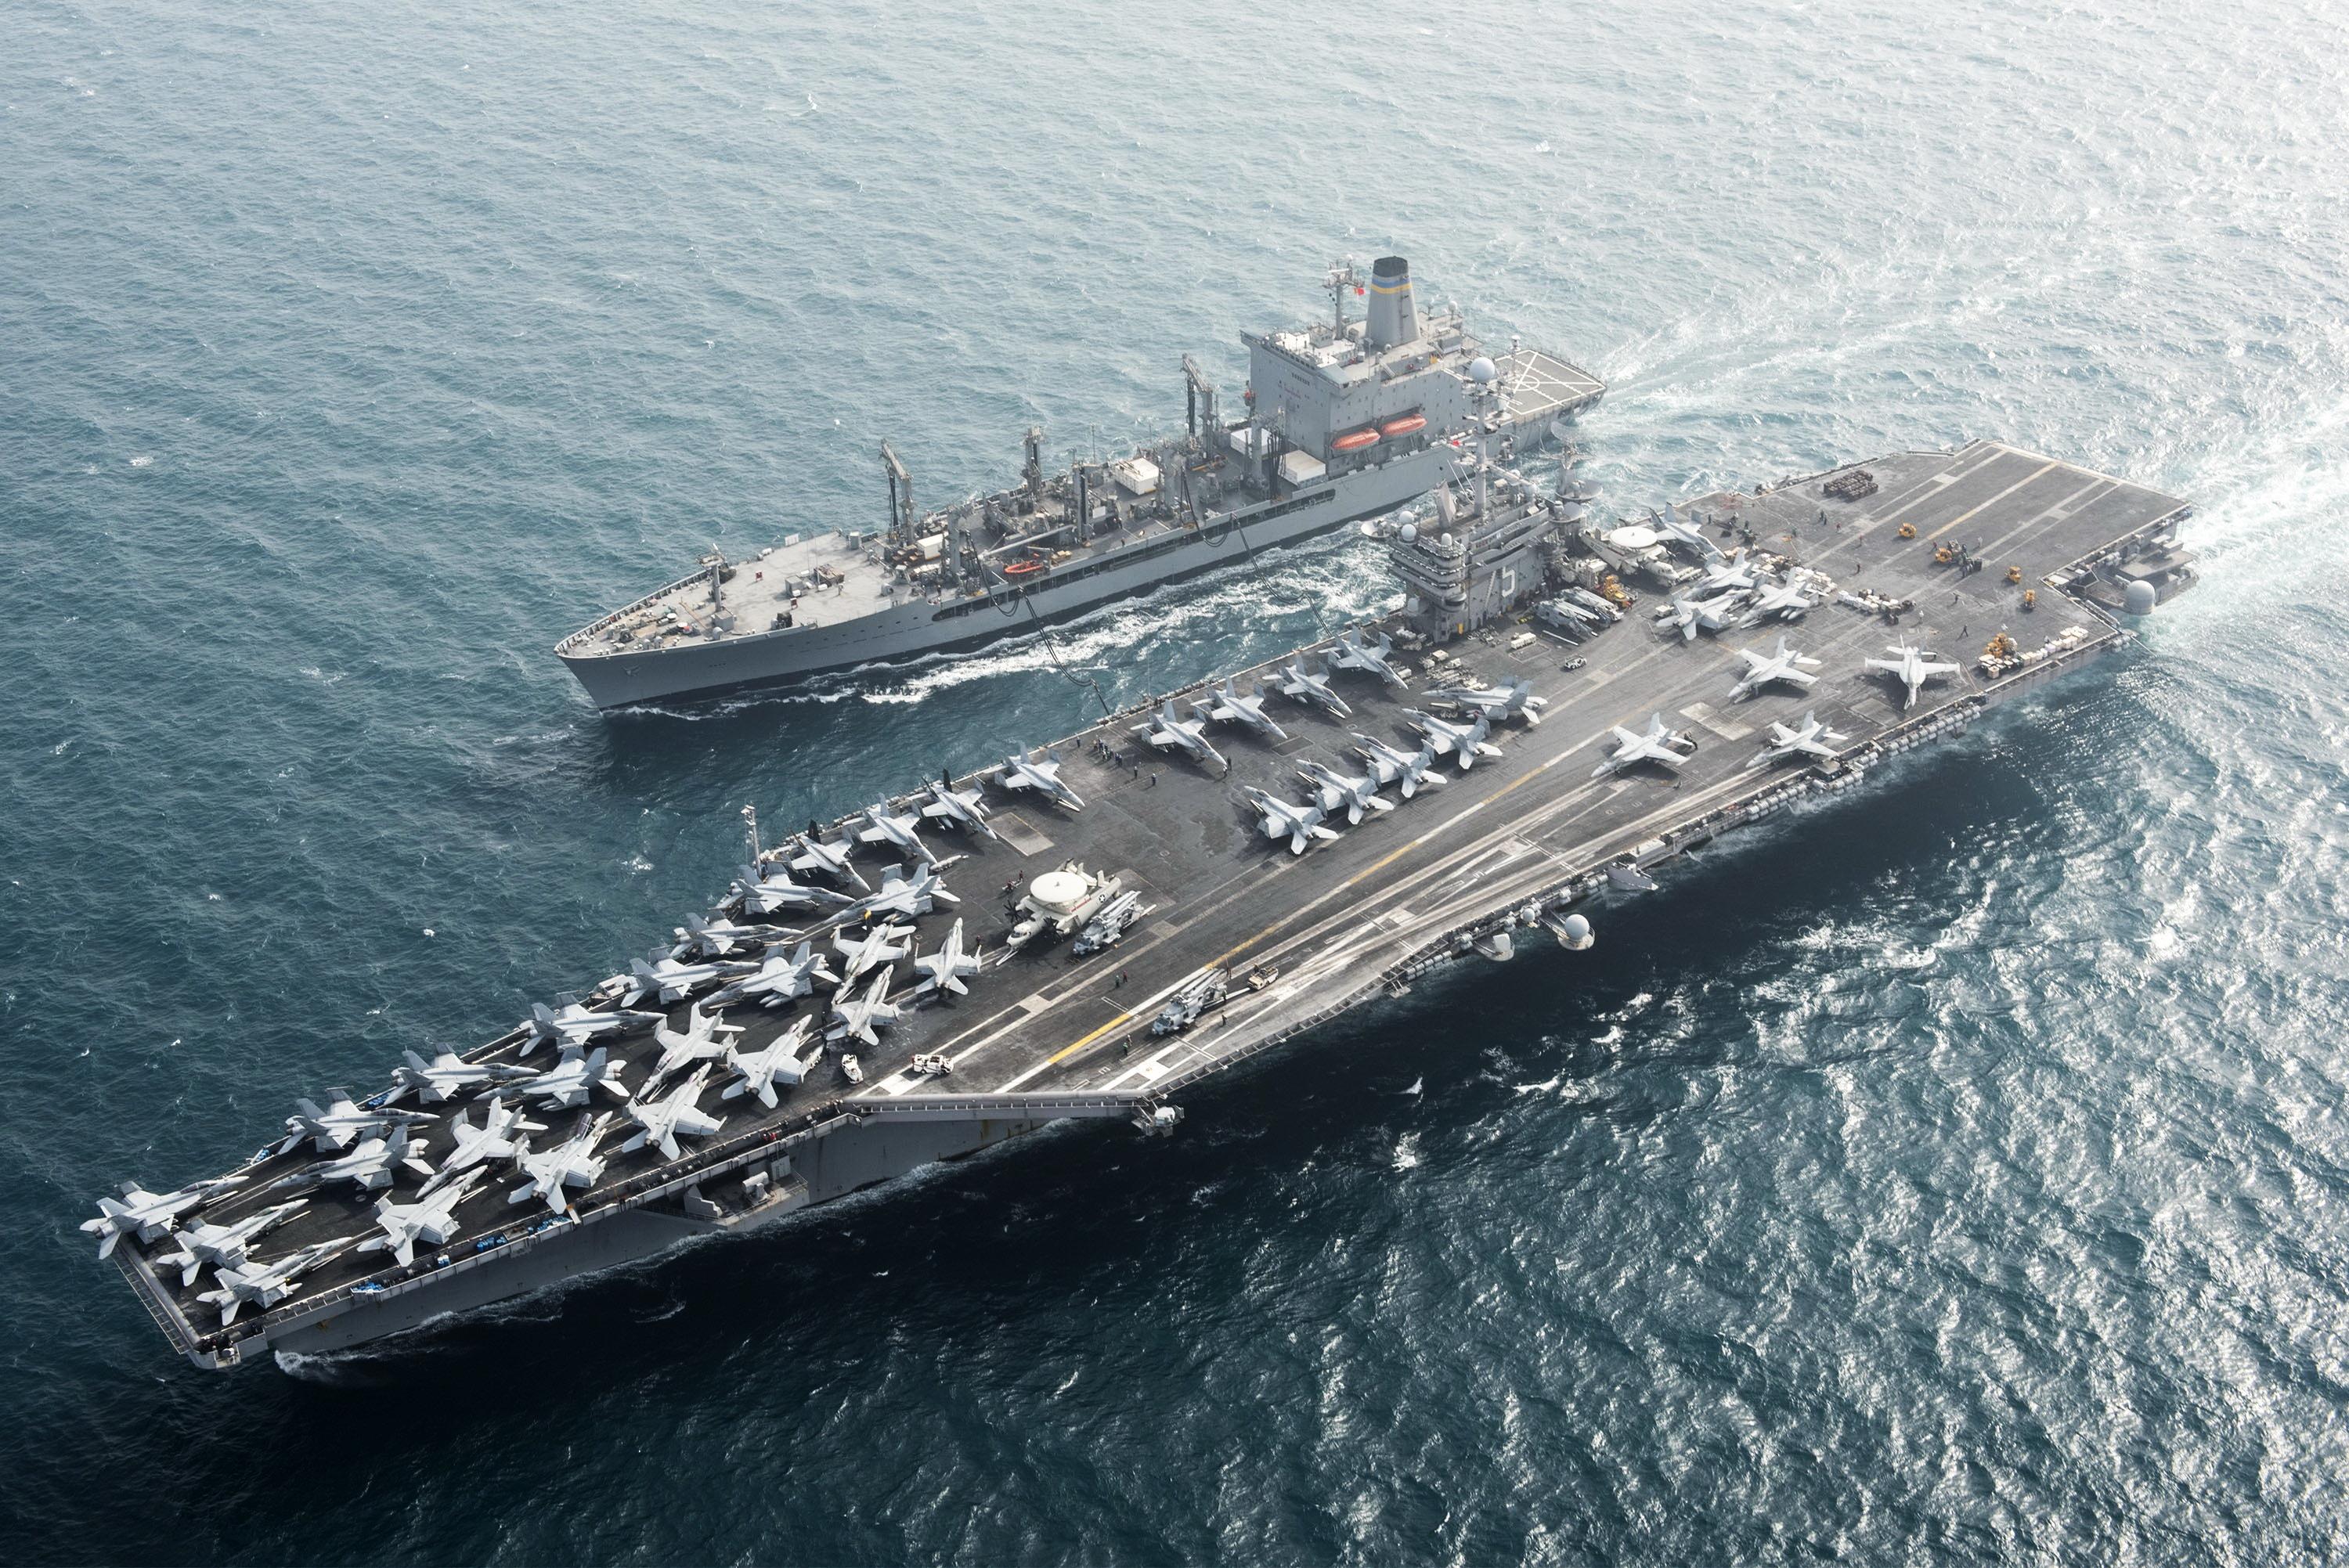 The Reason the Navy Is Exploding Bombs Near Its New Nuclear Aircraft Carrier | The National ...